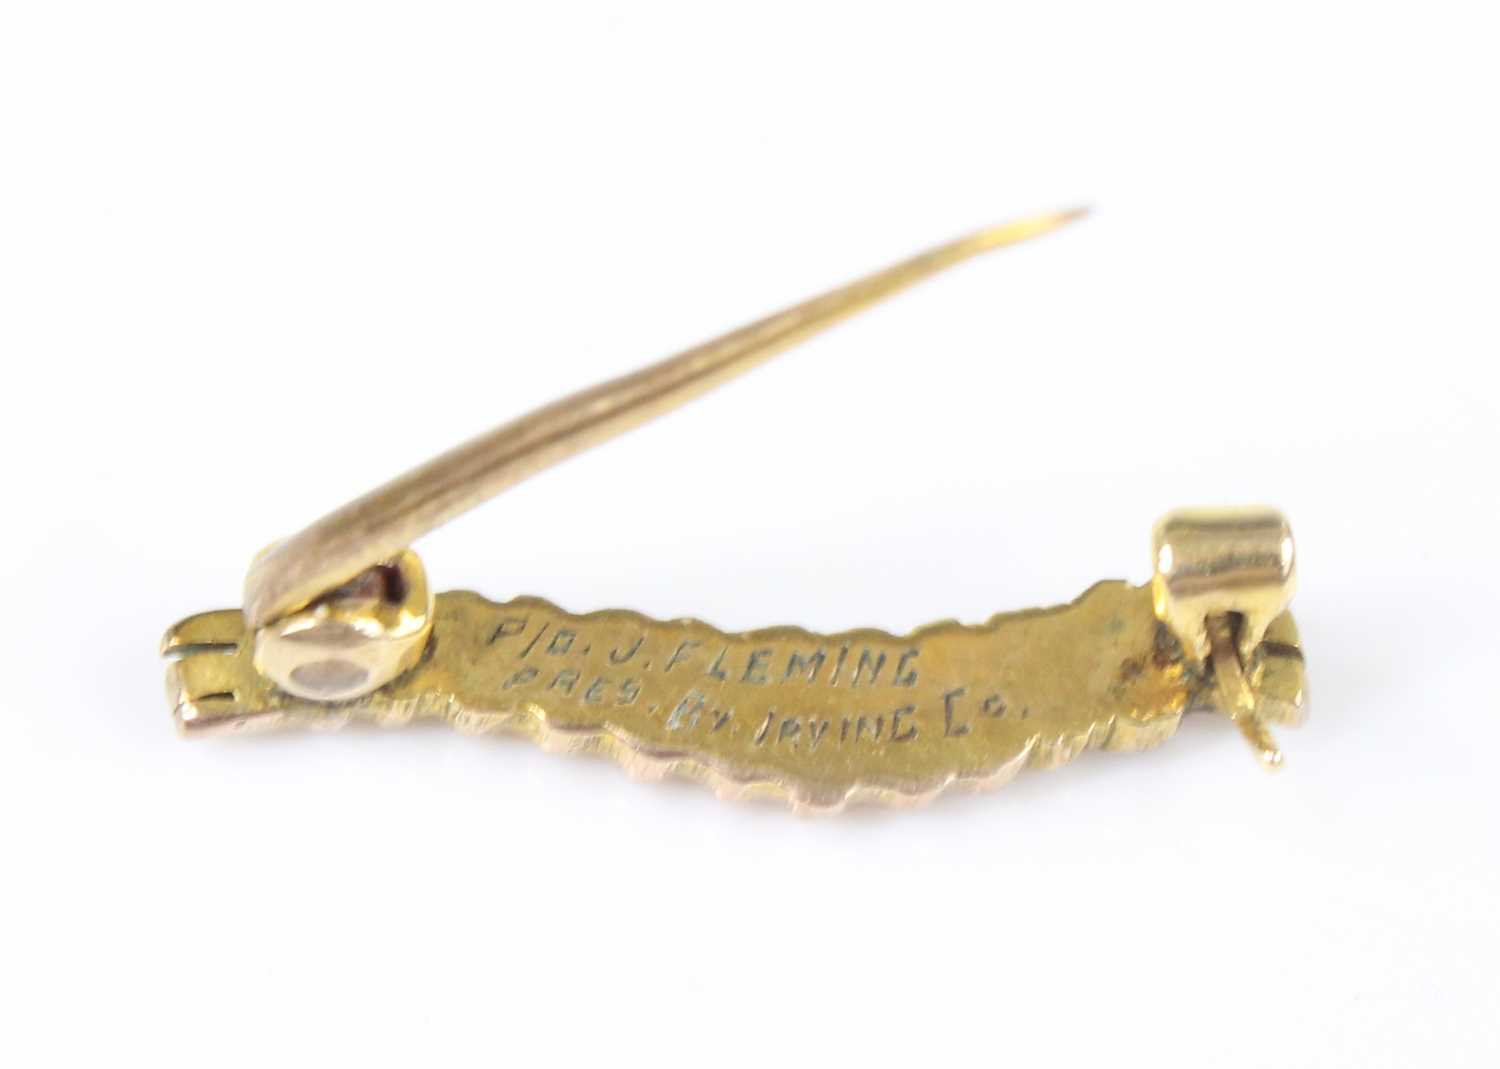 Attributed to Flying Officer John Fleming R.A.F 605 Squadron. A yellow metal Caterpillar Club pin - Image 4 of 10